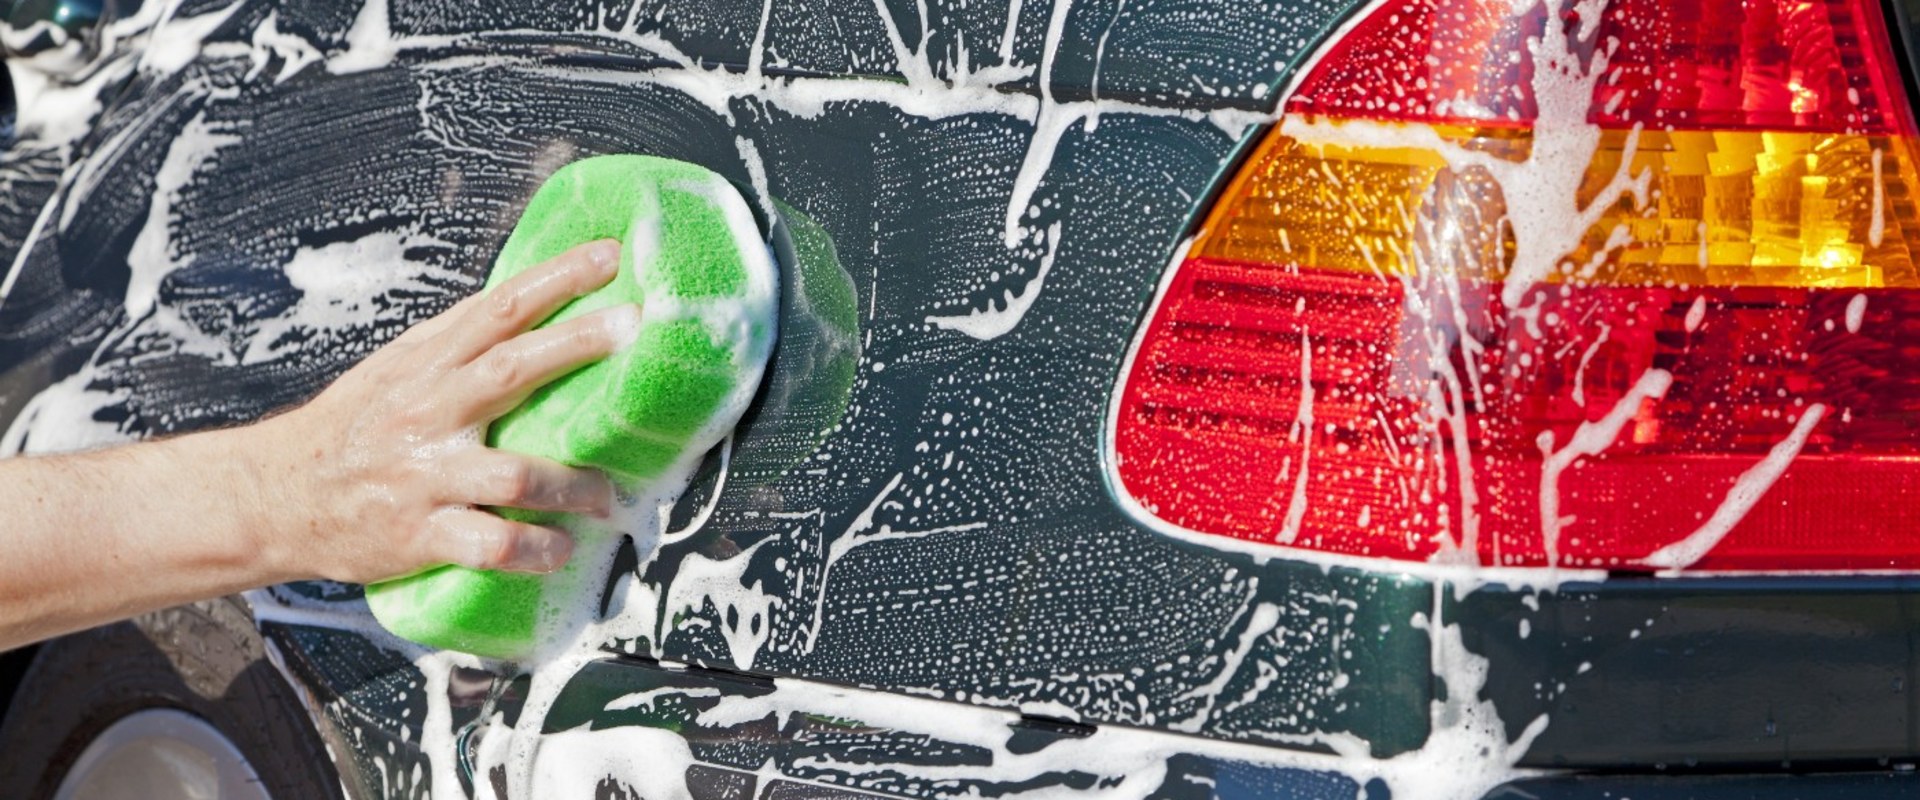 How do mobile car wash get water?